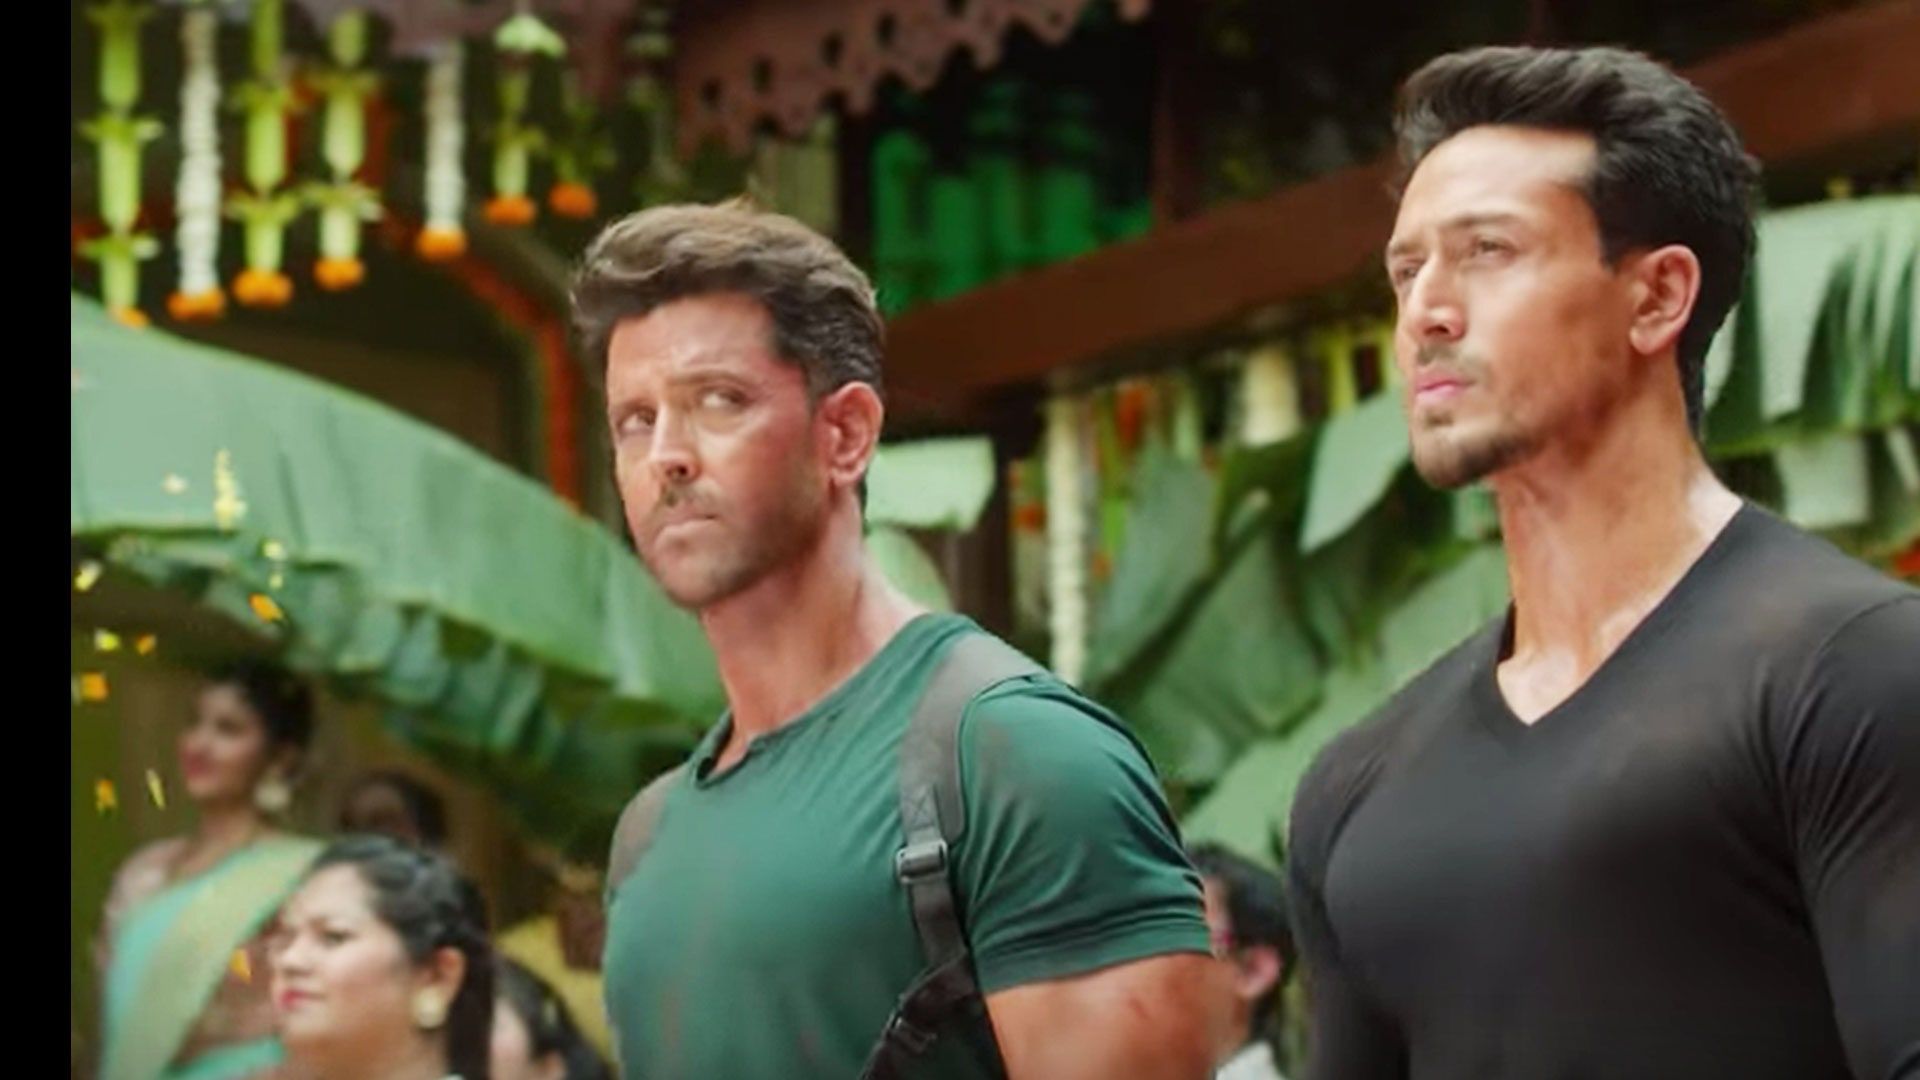 War Trailer: Hrithik Roshan and Tiger Shroff's action scenes will